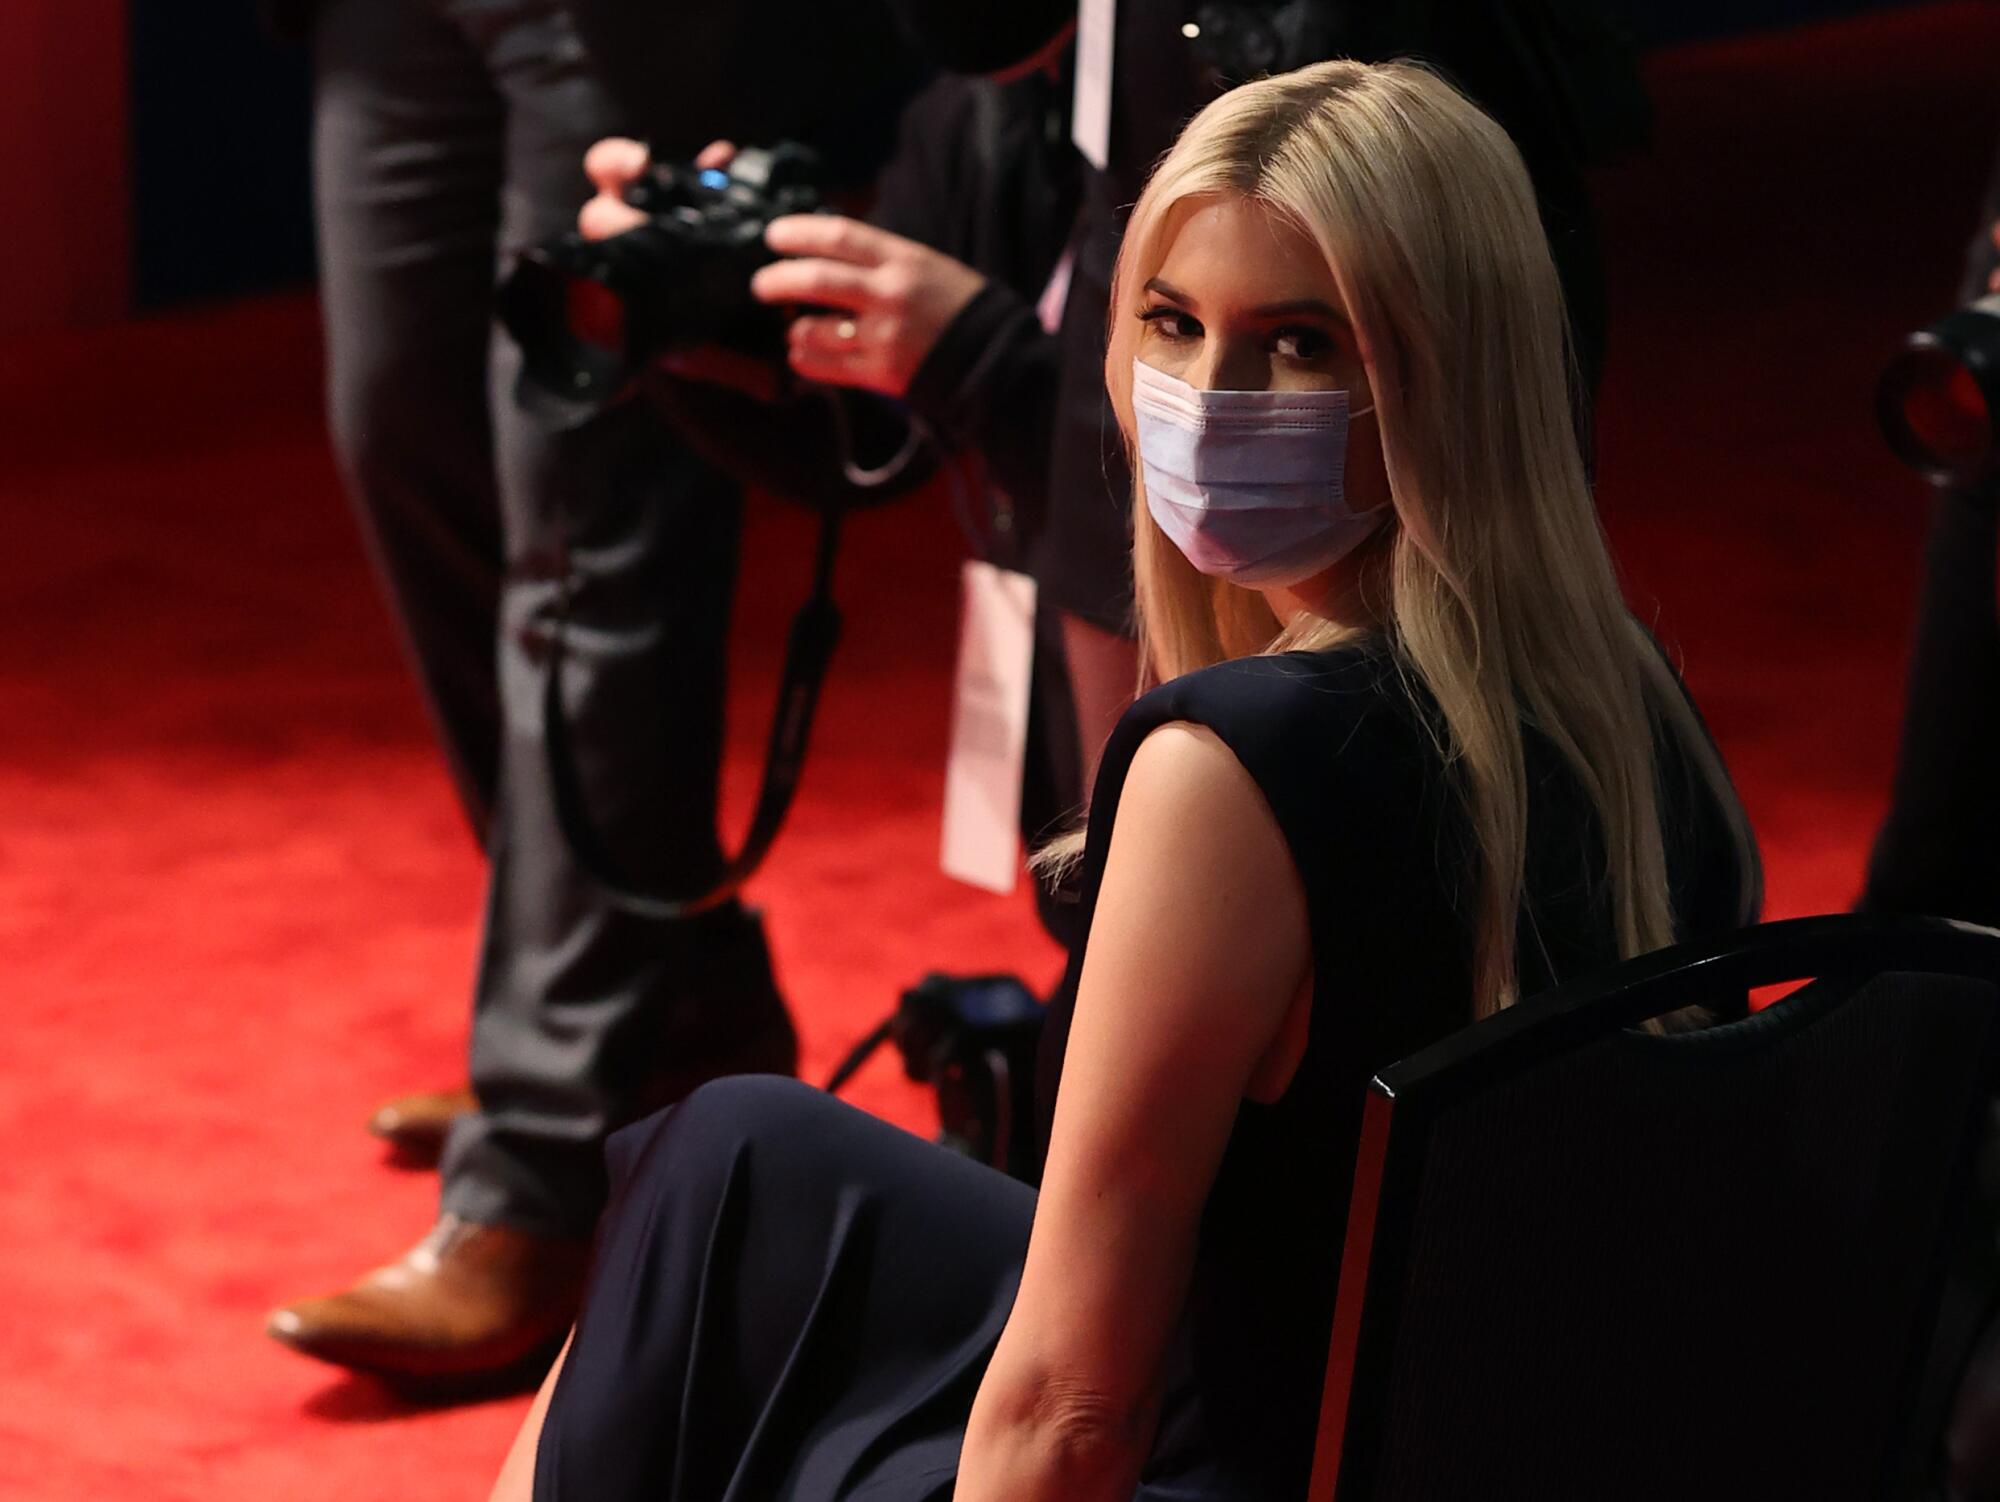 Ivanka Trump wears a mask while sitting in a chair in the debate hall